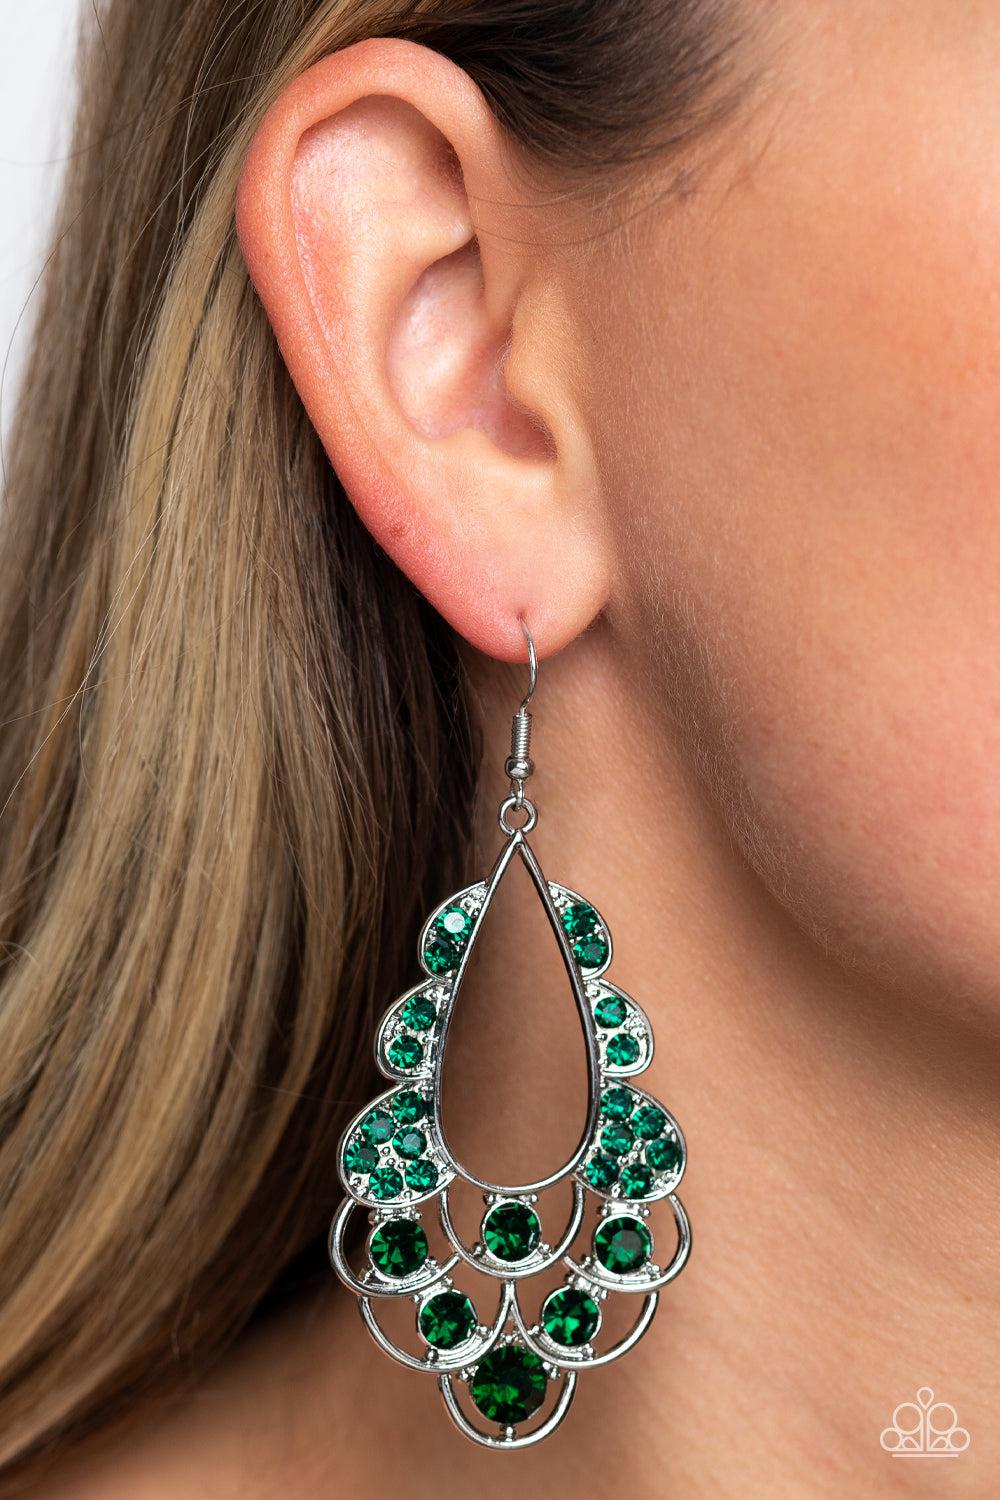 Majestic Masquerade Green Rhinestone Earrings - Paparazzi Accessories-on model - CarasShop.com - $5 Jewelry by Cara Jewels